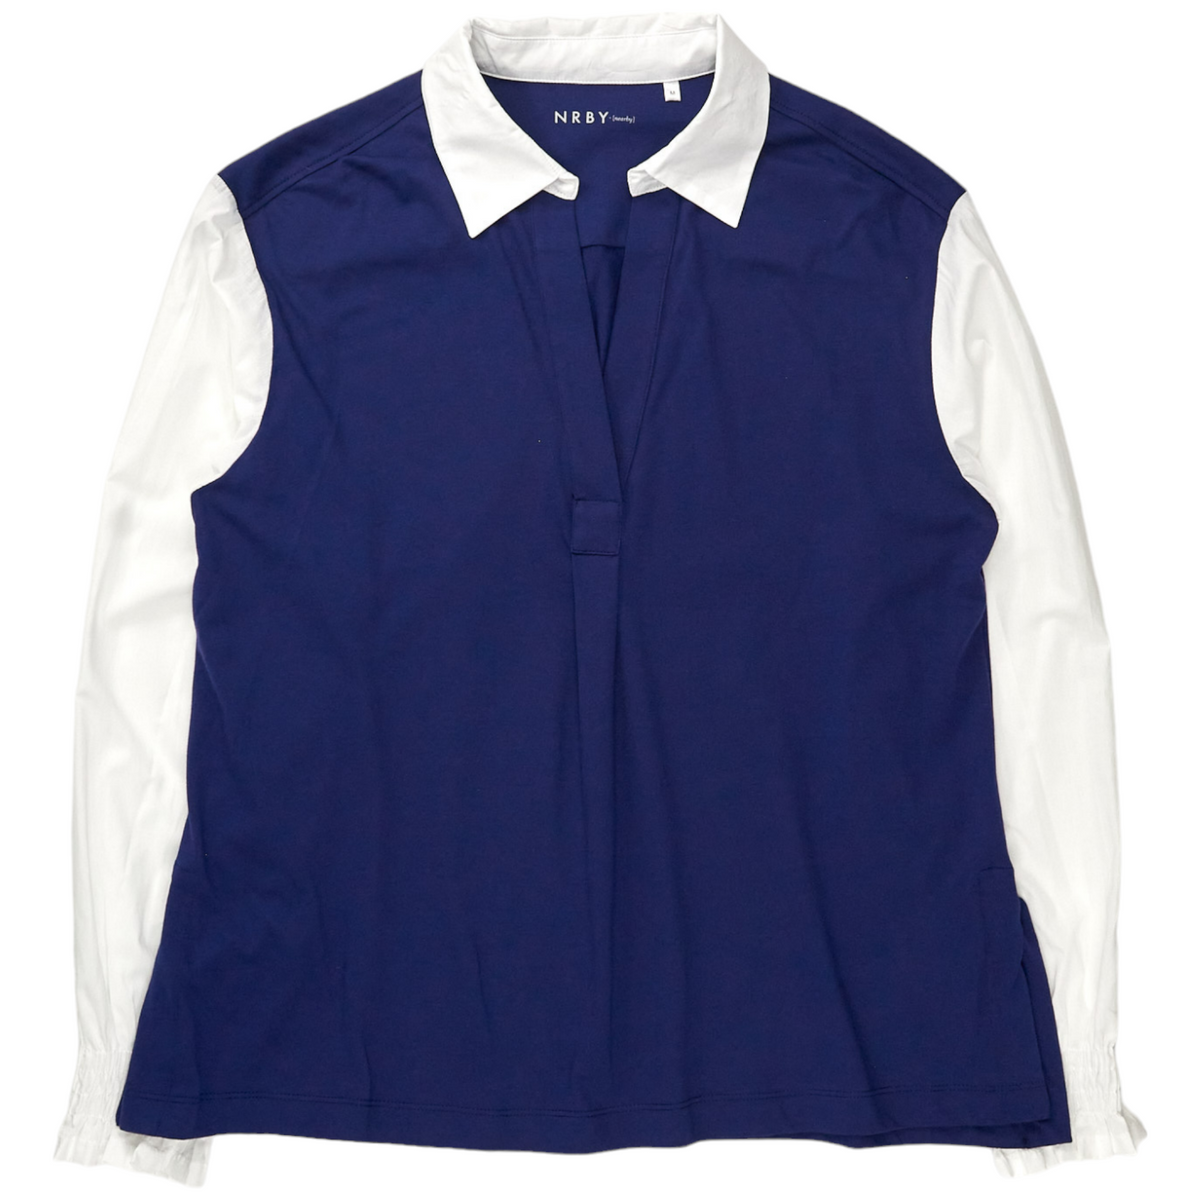 NRBY Navy/White Rugby Style Top